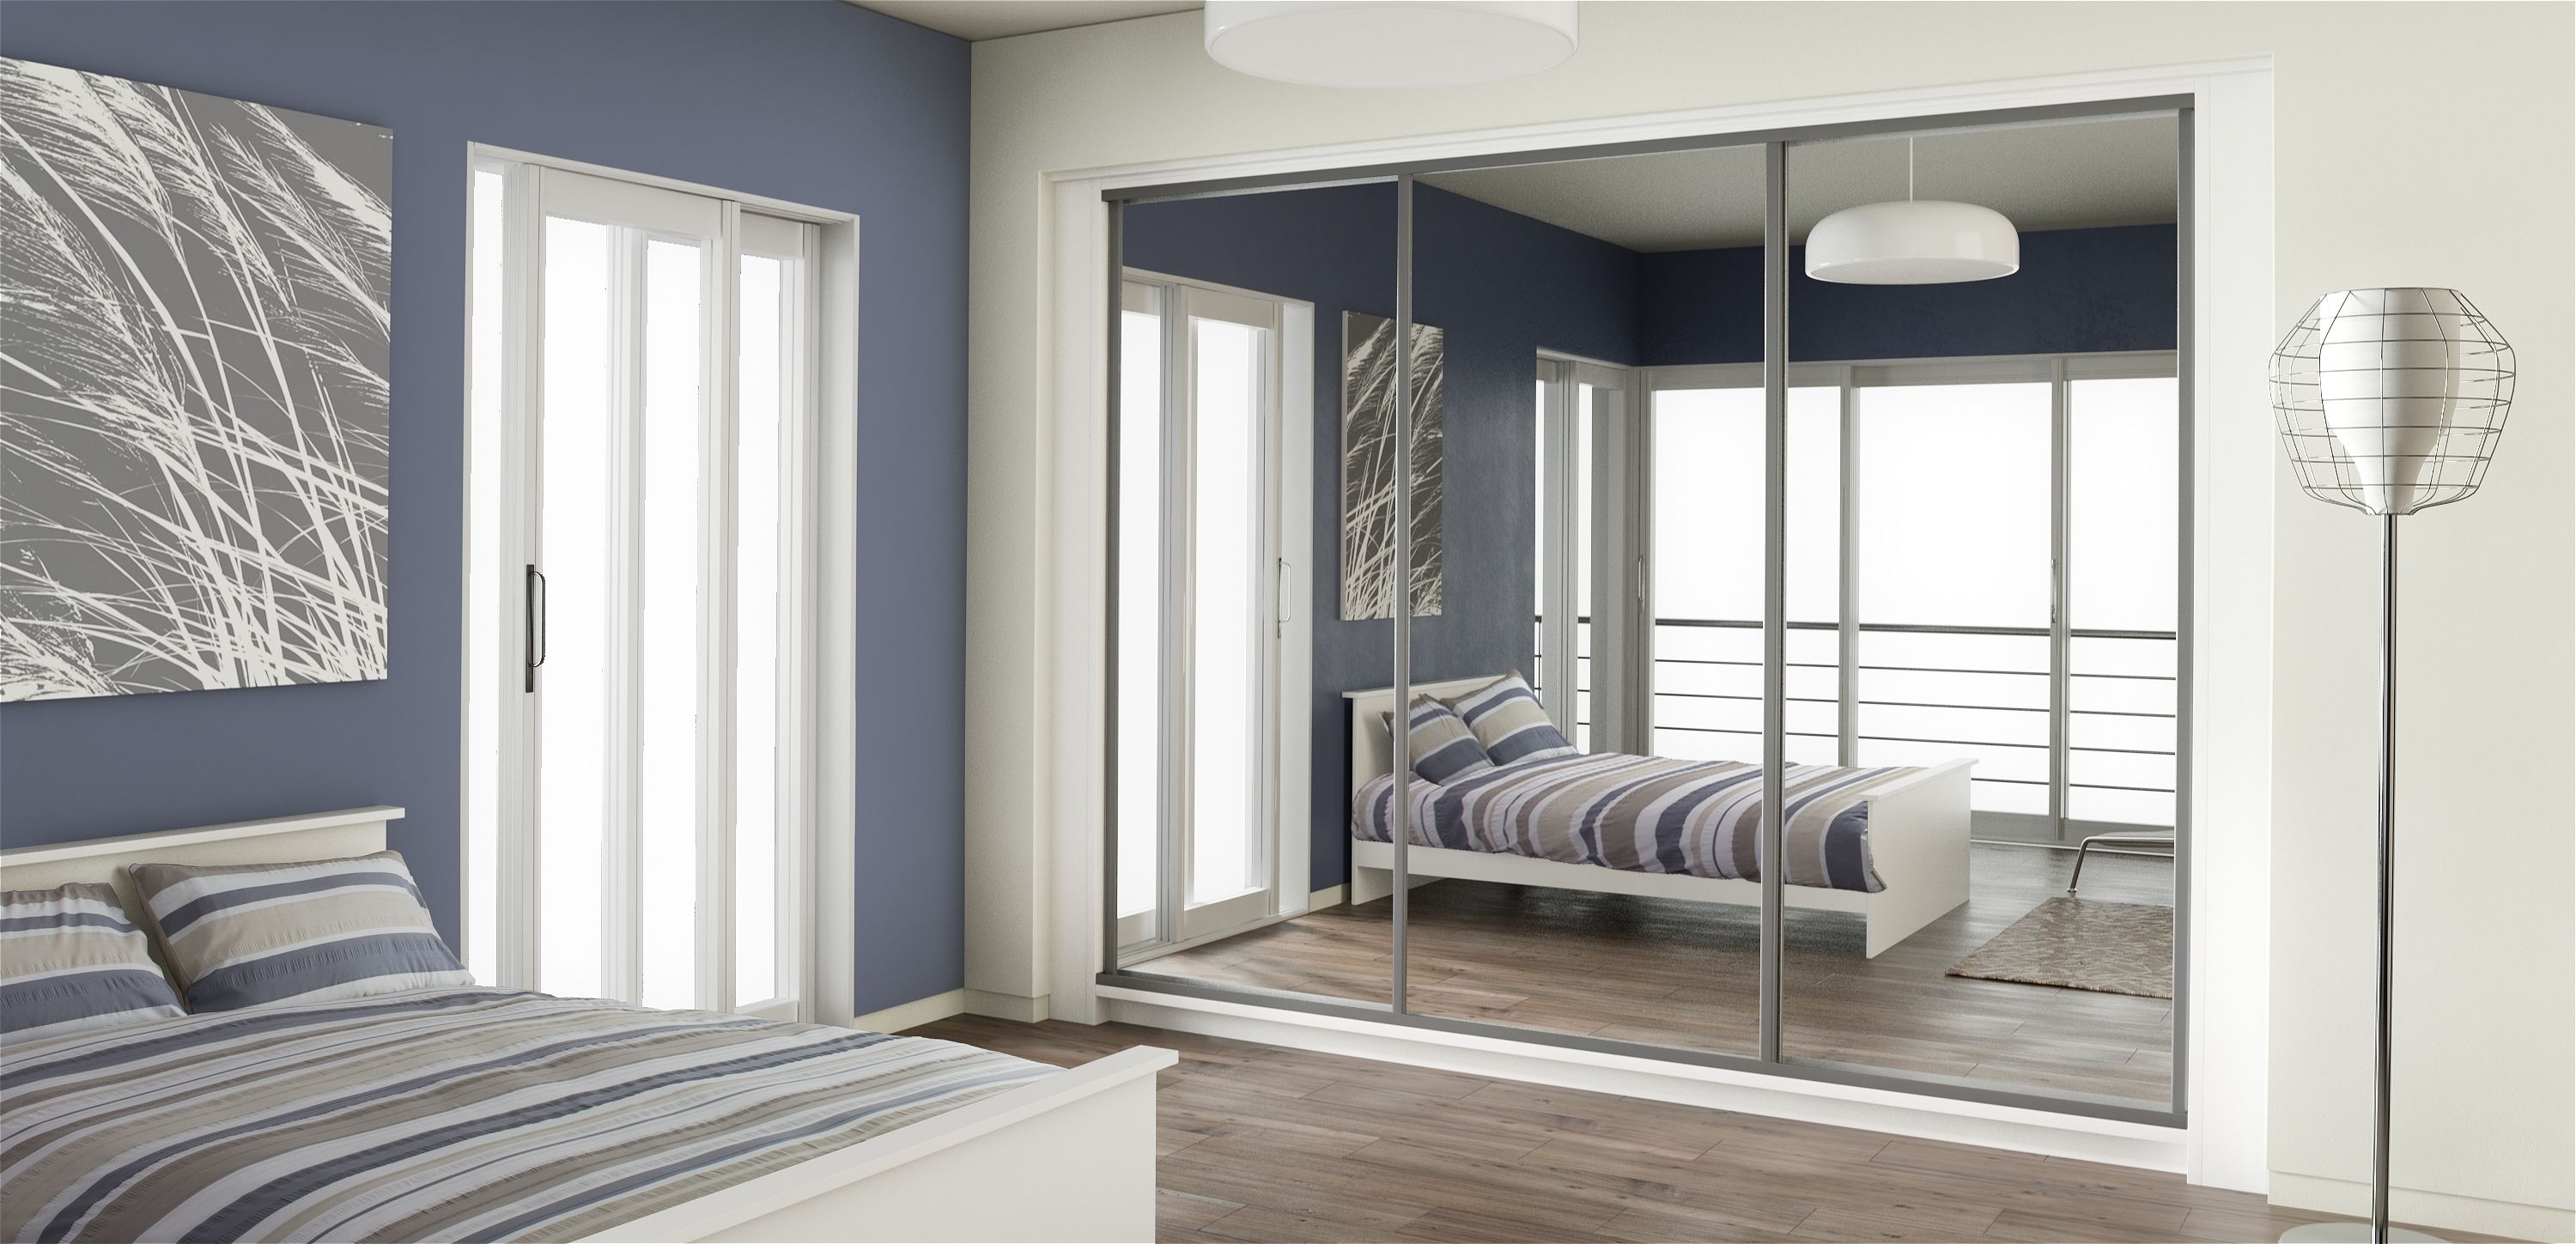 Mirrored Wardrobes Throughout Famous Mirror Design Ideas: Robes Brand Bedroom Mirrored Wardrobes Lens (View 7 of 15)